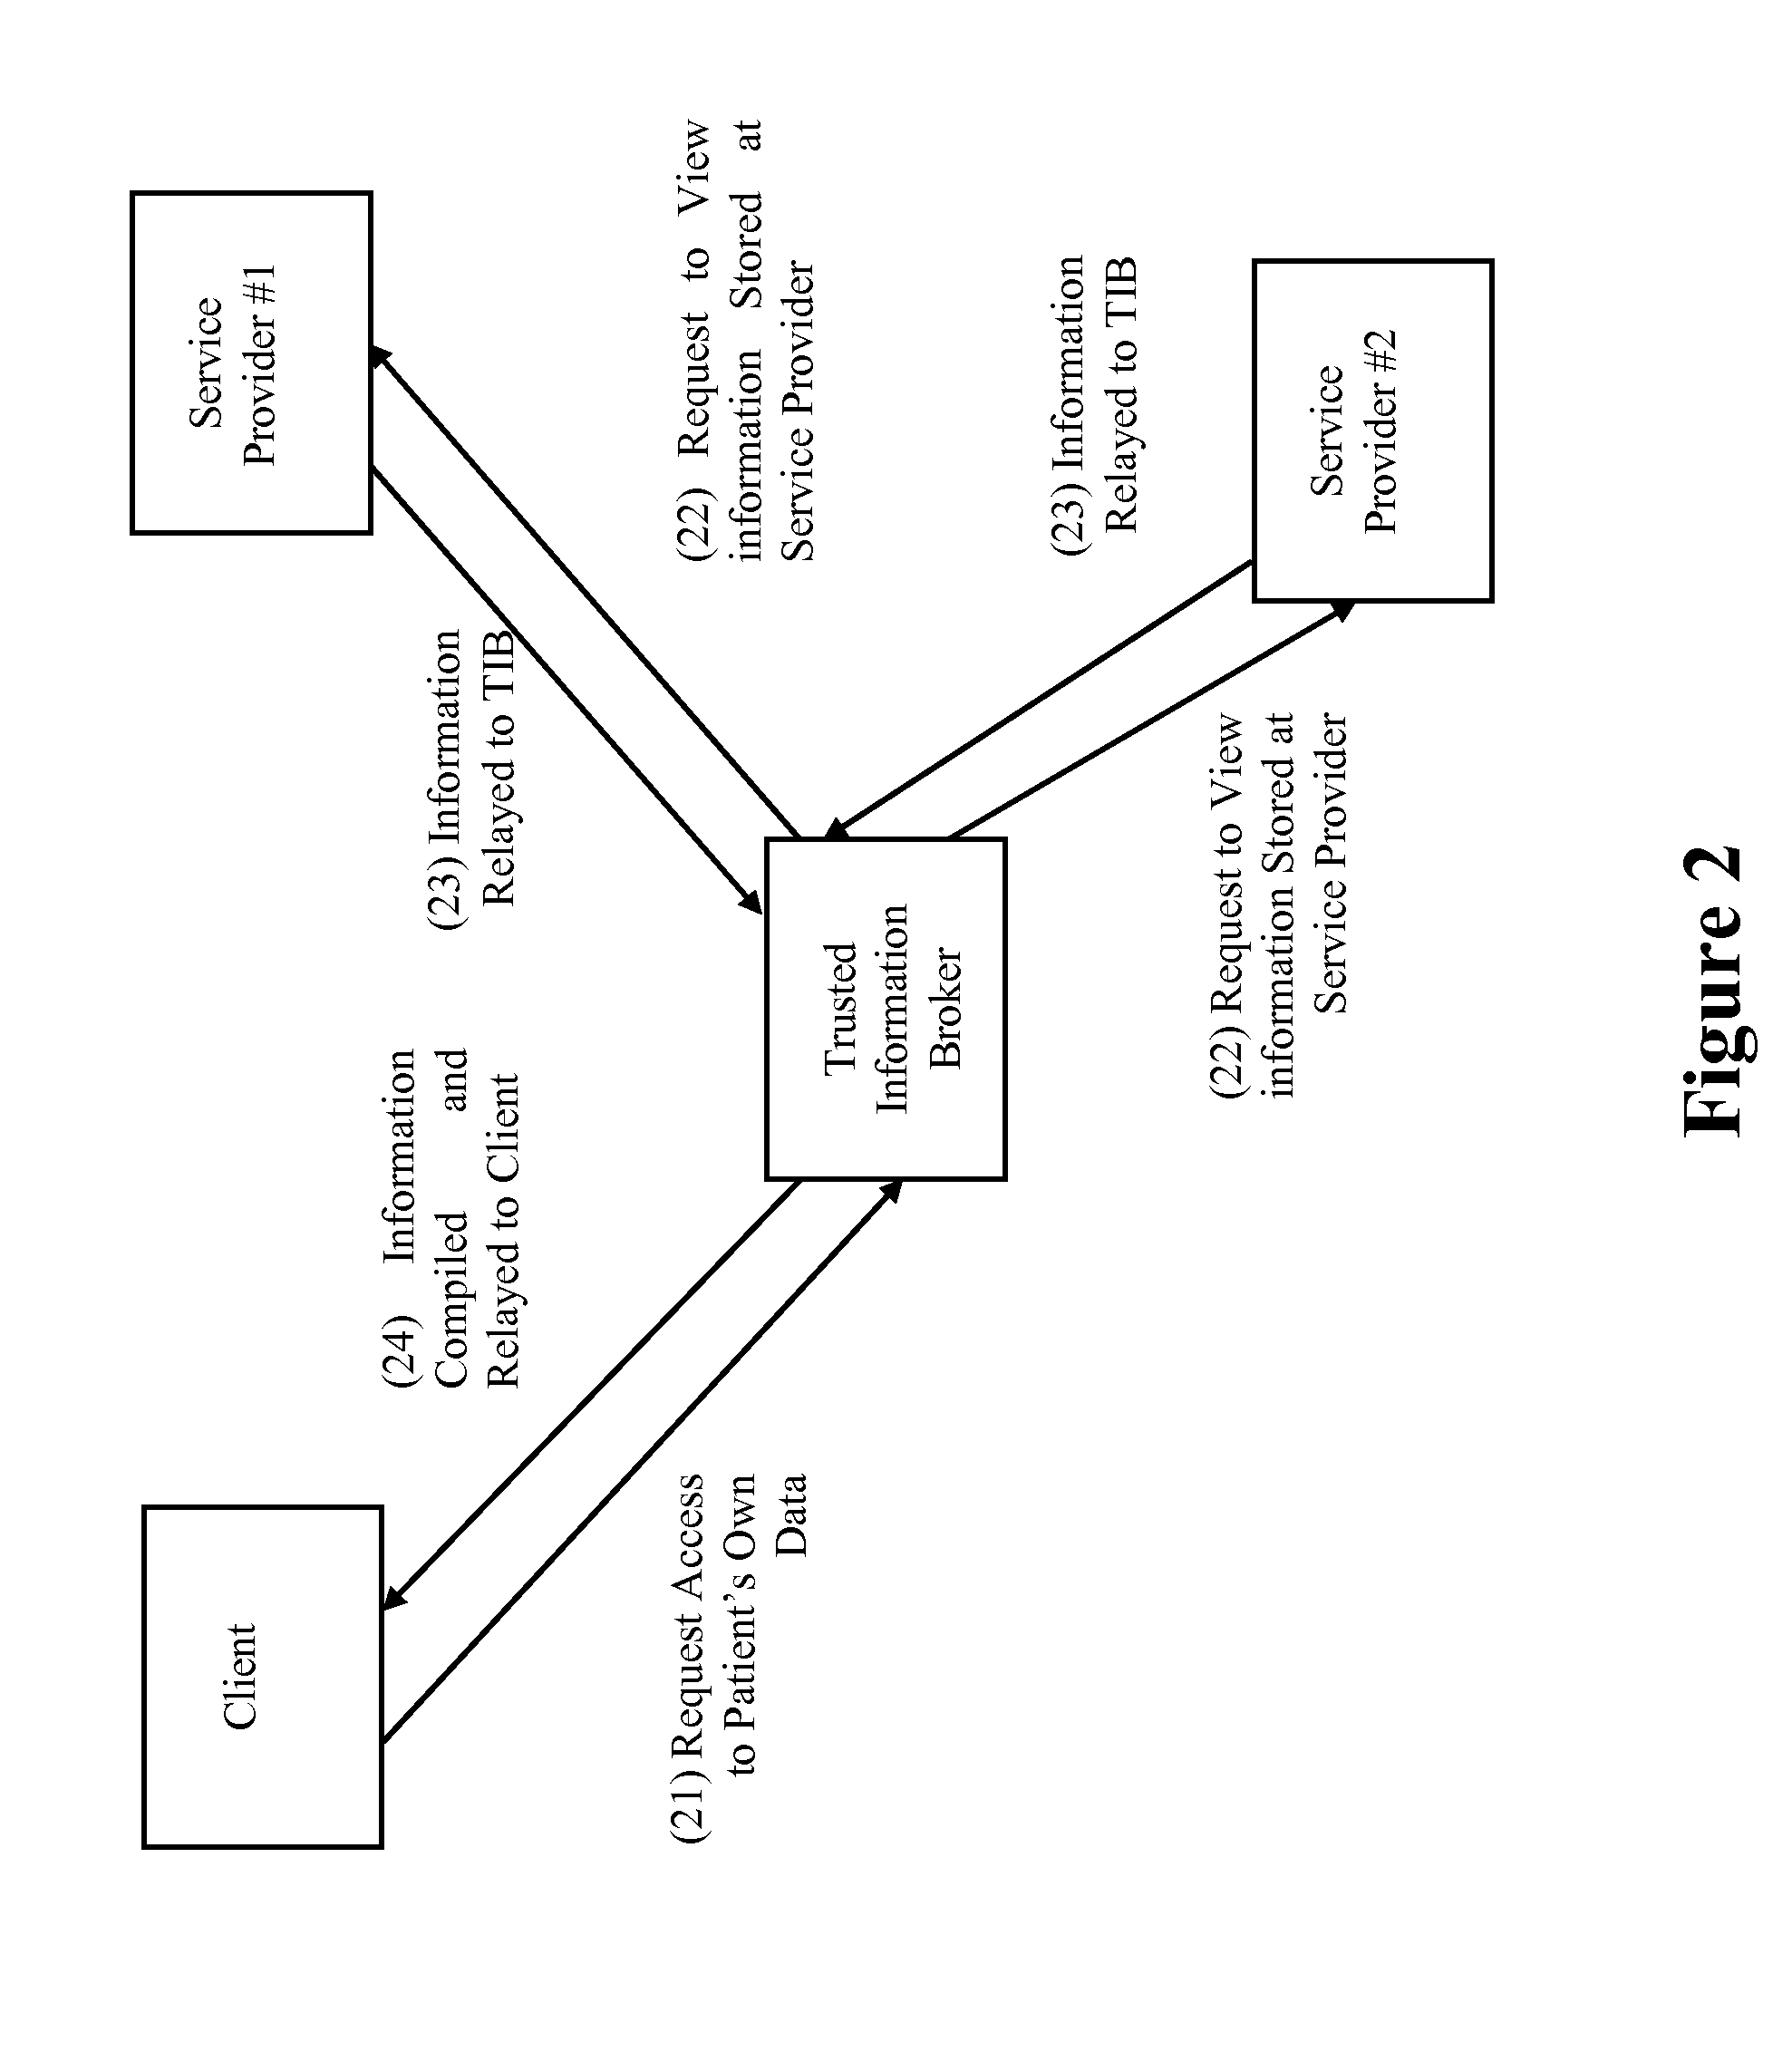 Privacy compliant consent and data access management system and methods